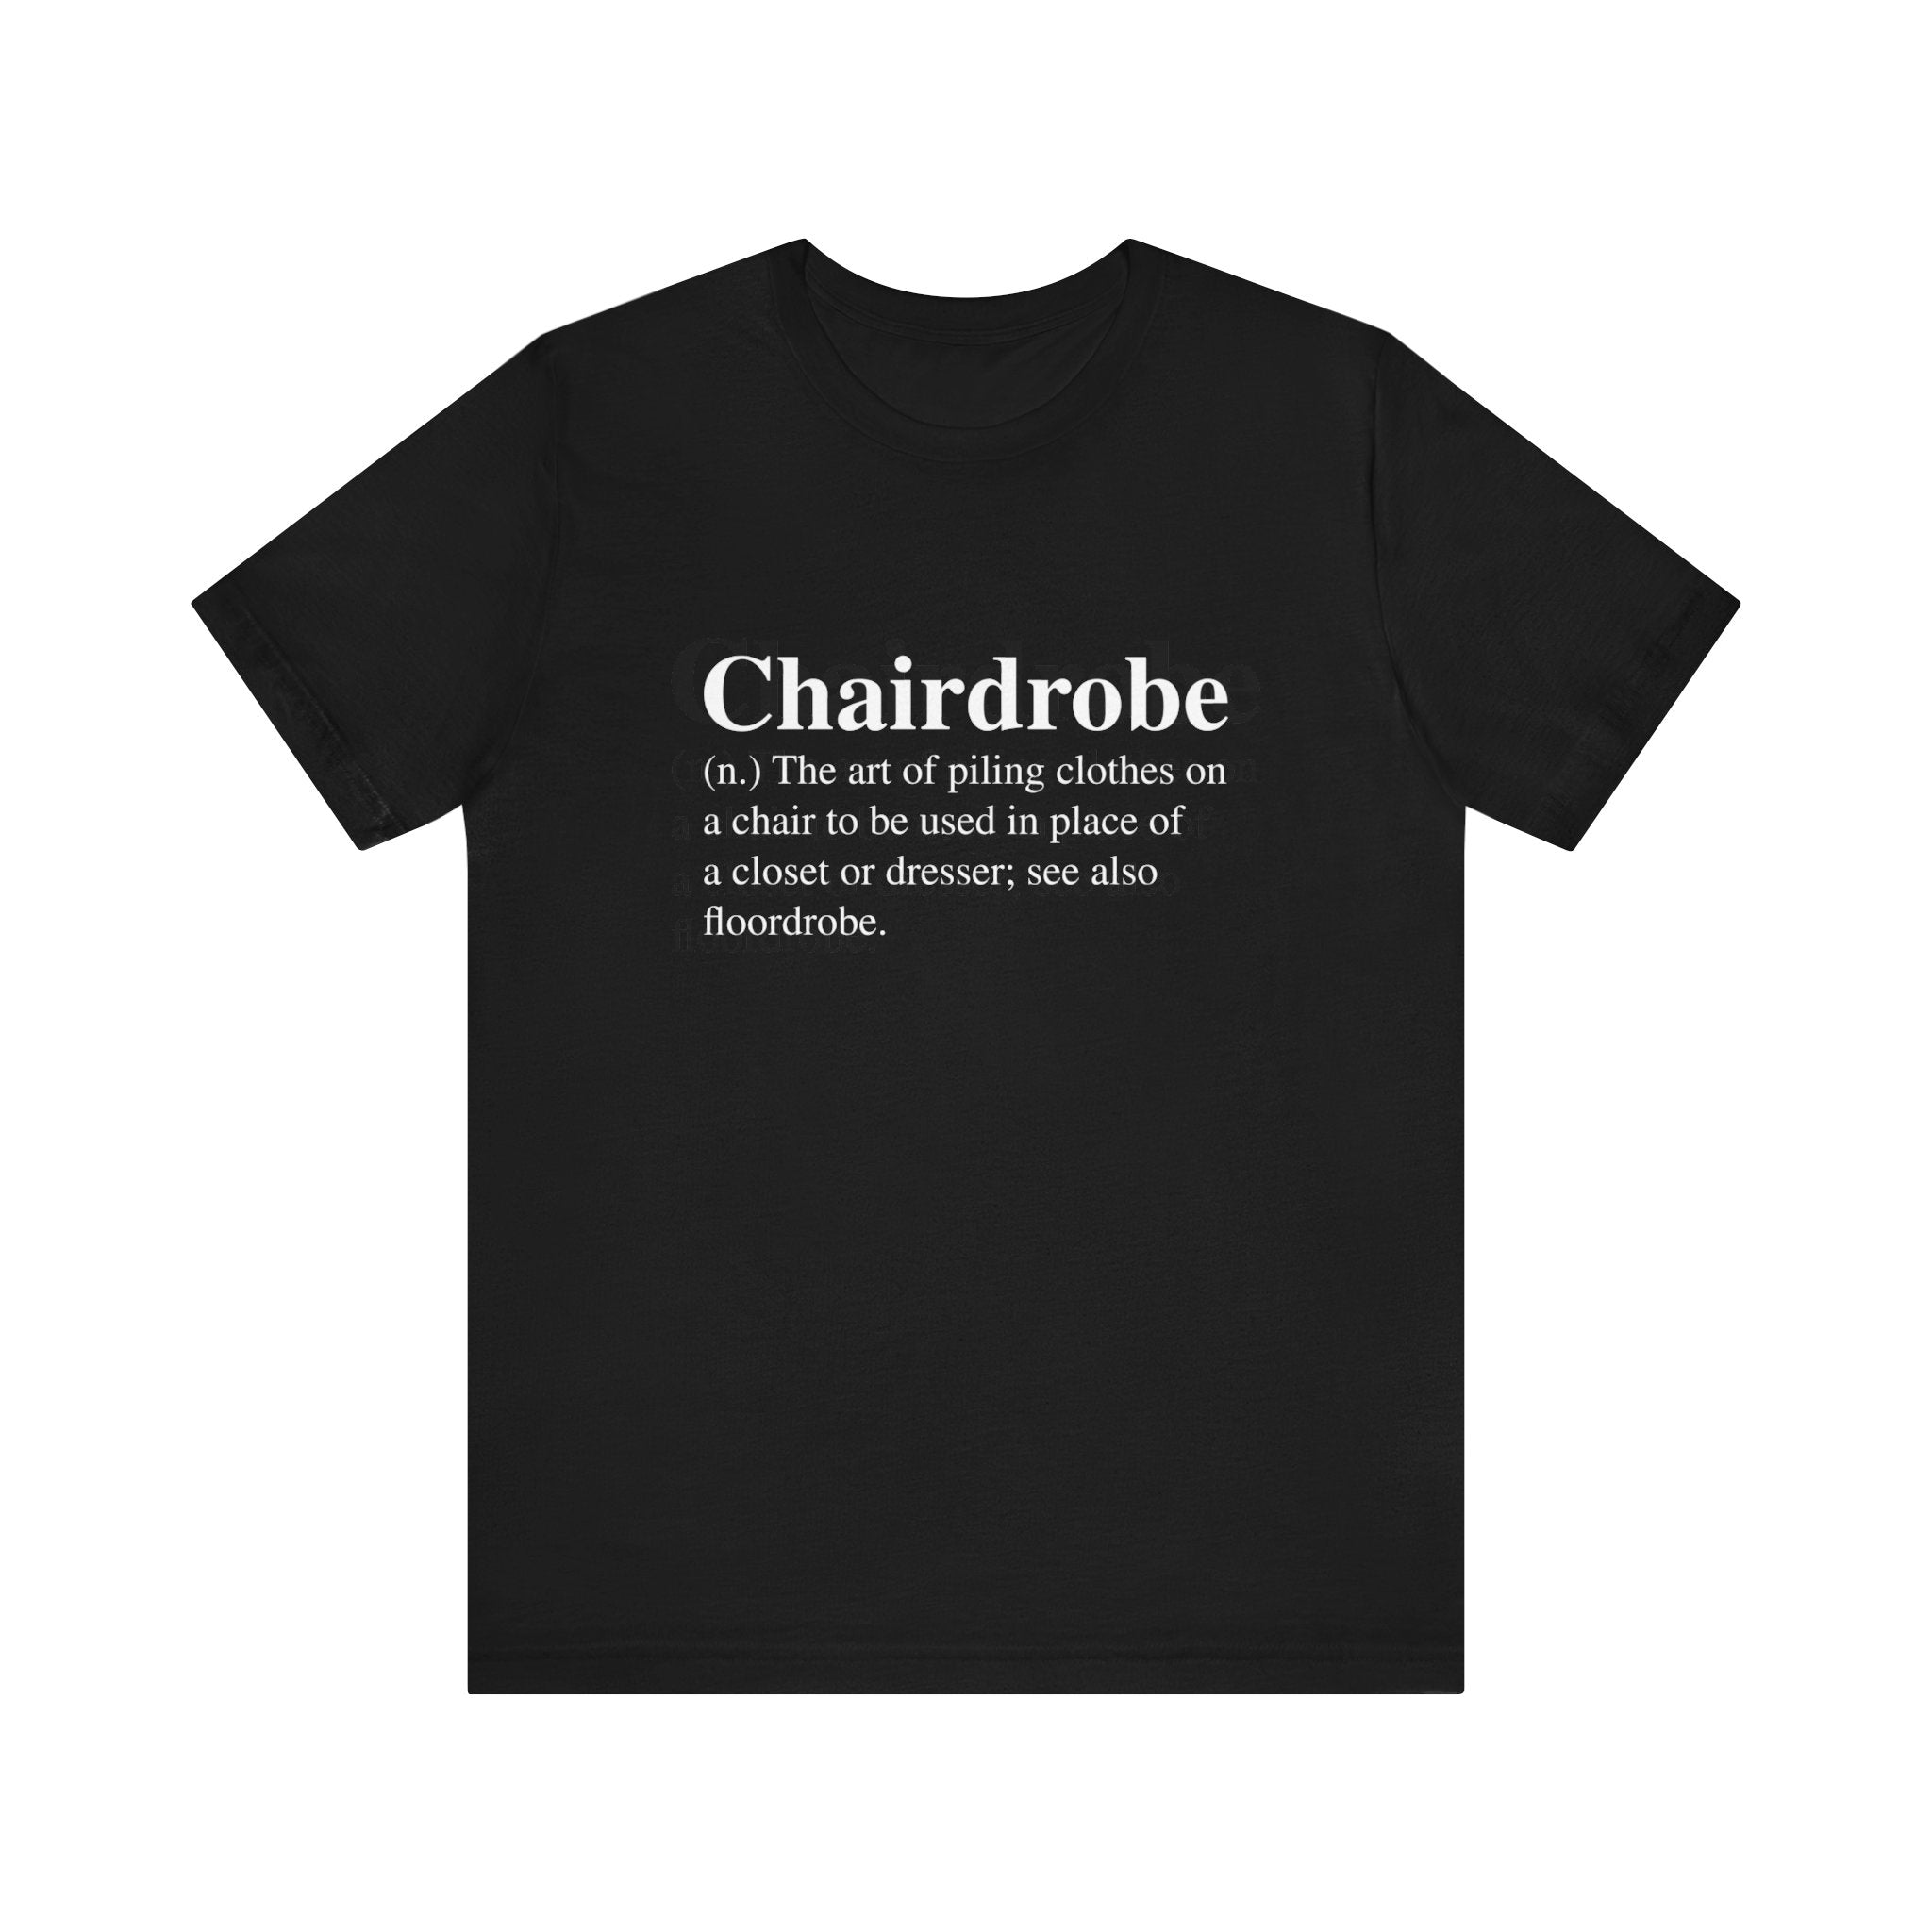 Chairdrobe T-Shirt with white text defining "chairdrobe" as the art of piling clothes on a chair to substitute for a closet or dresser.